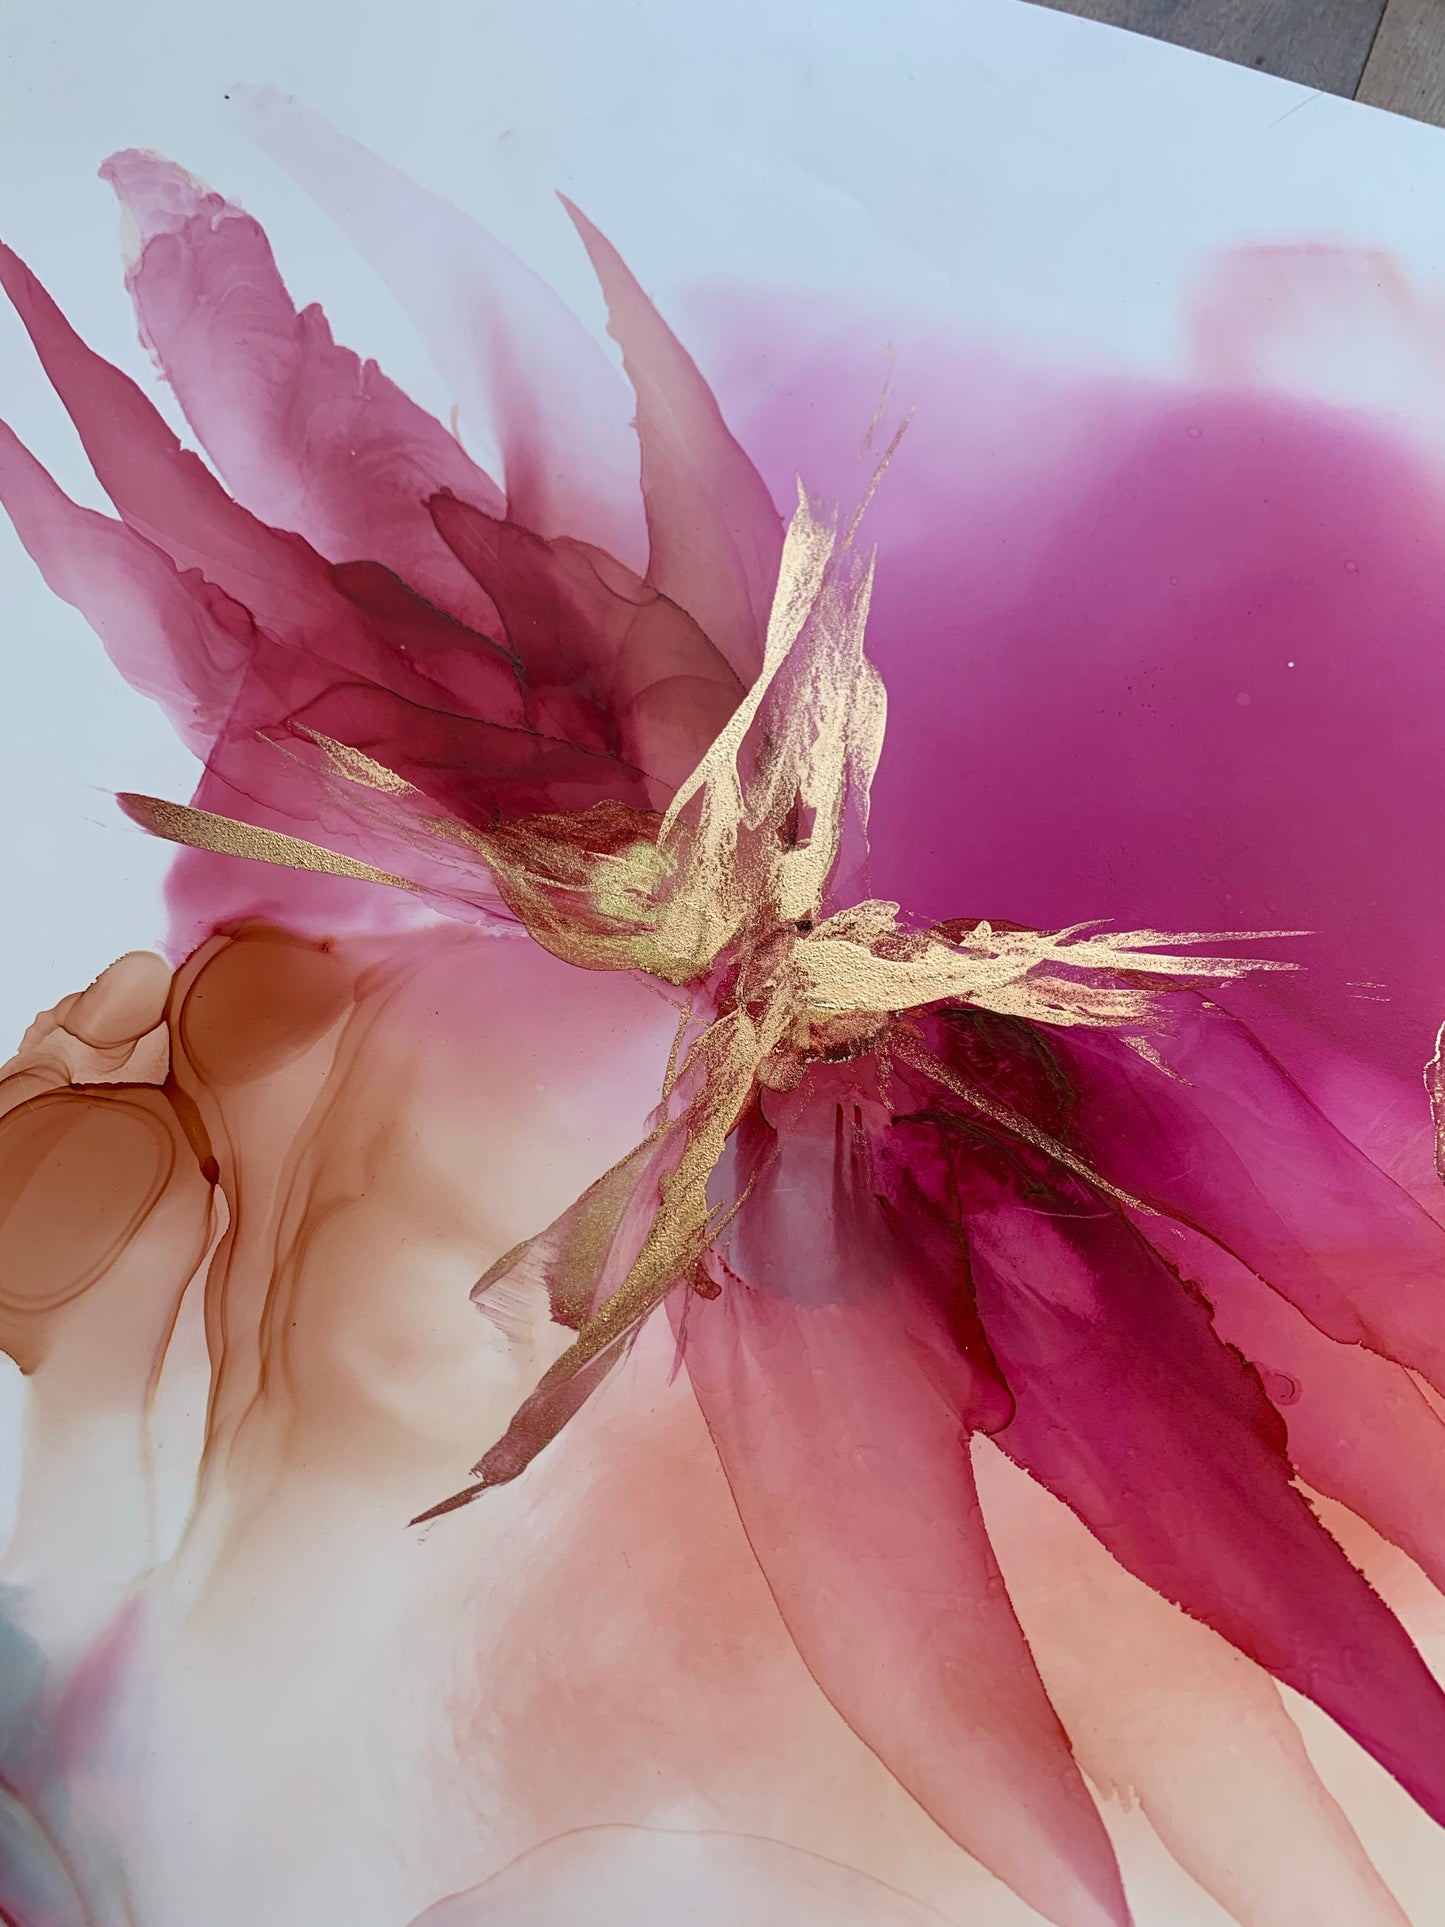 Sun Dance - Large abstract alcohol ink artwork with flowers.